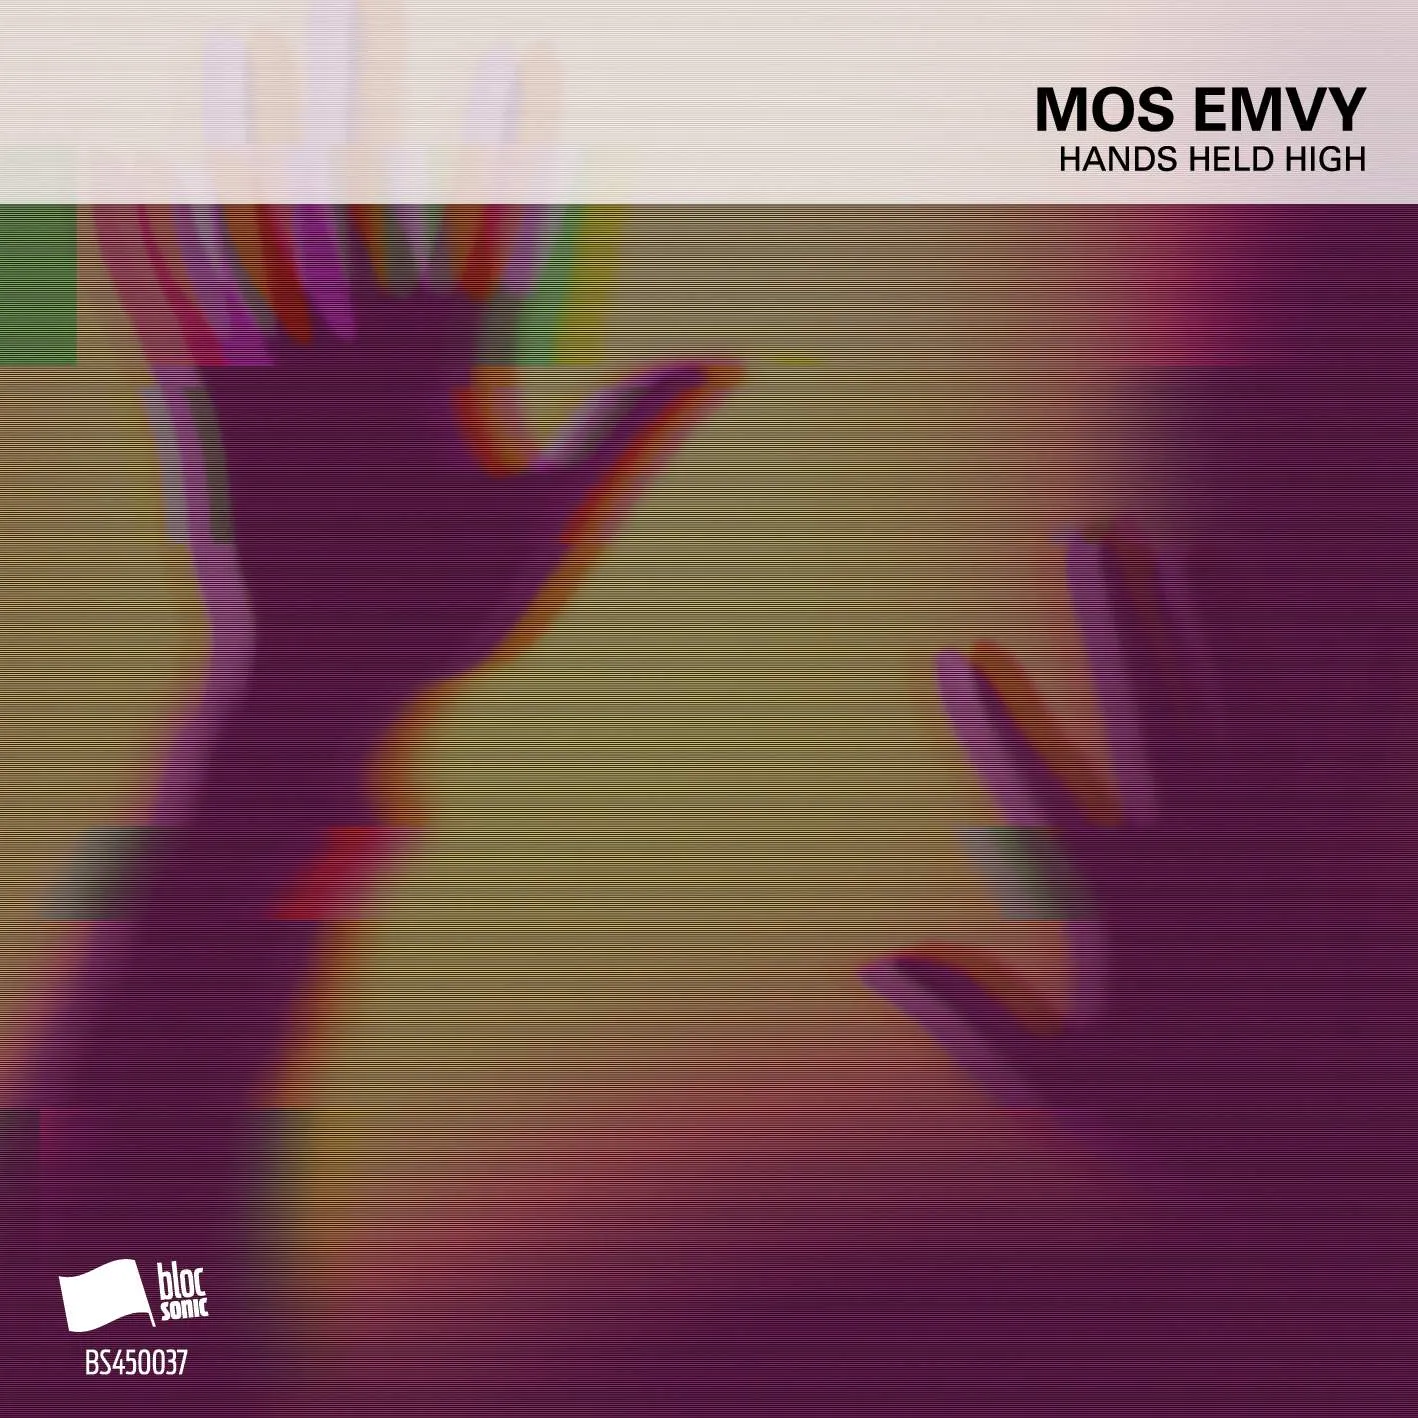 Album cover for “Hands Held High” by Mos Emvy